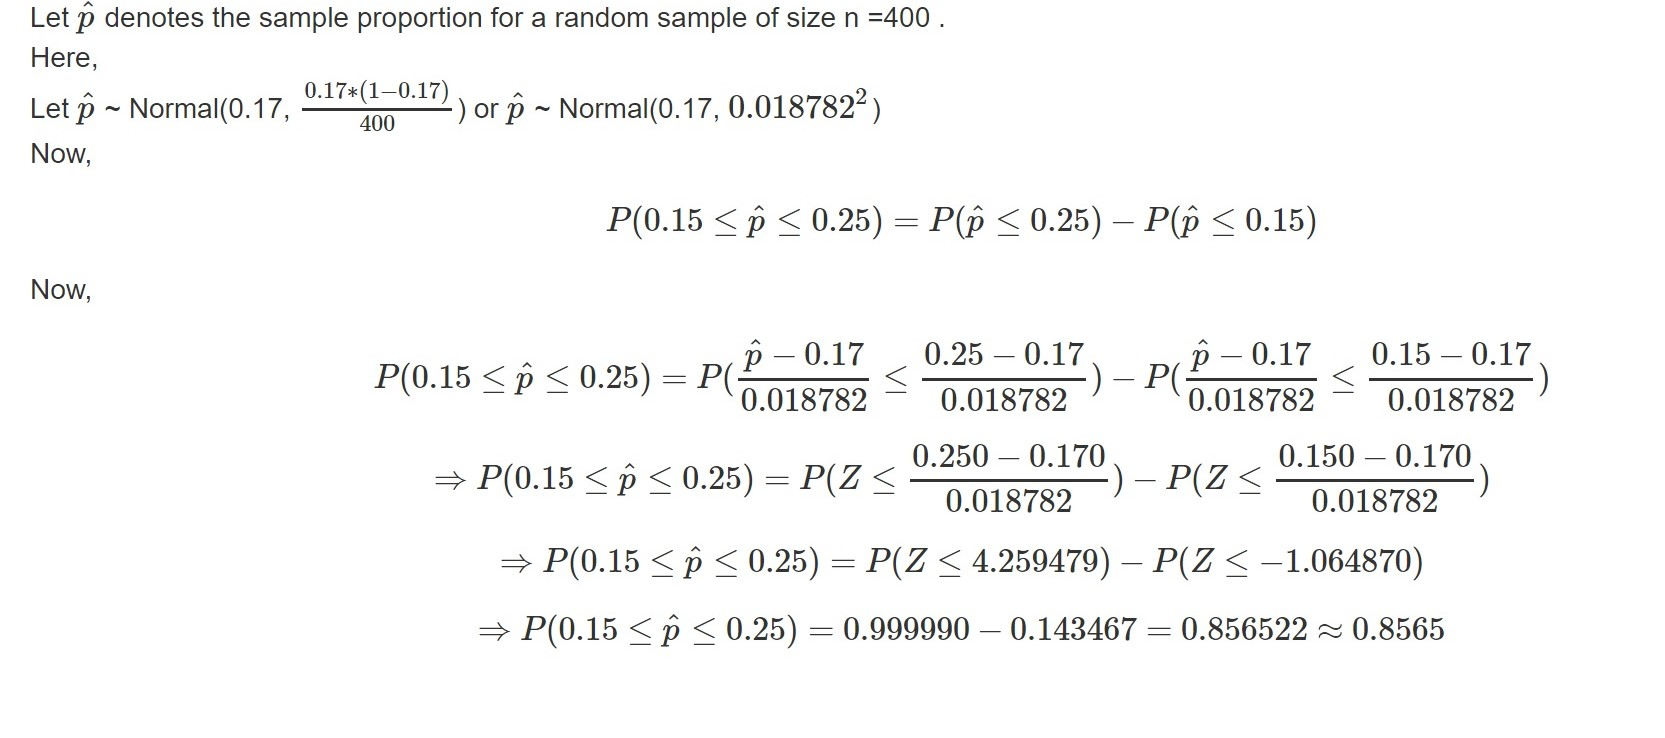 Let p denotes the sample proportion for a random sample of size n =400. Here, Let Ô - Normal(0.17, .16* 120.14%) or p - Norma